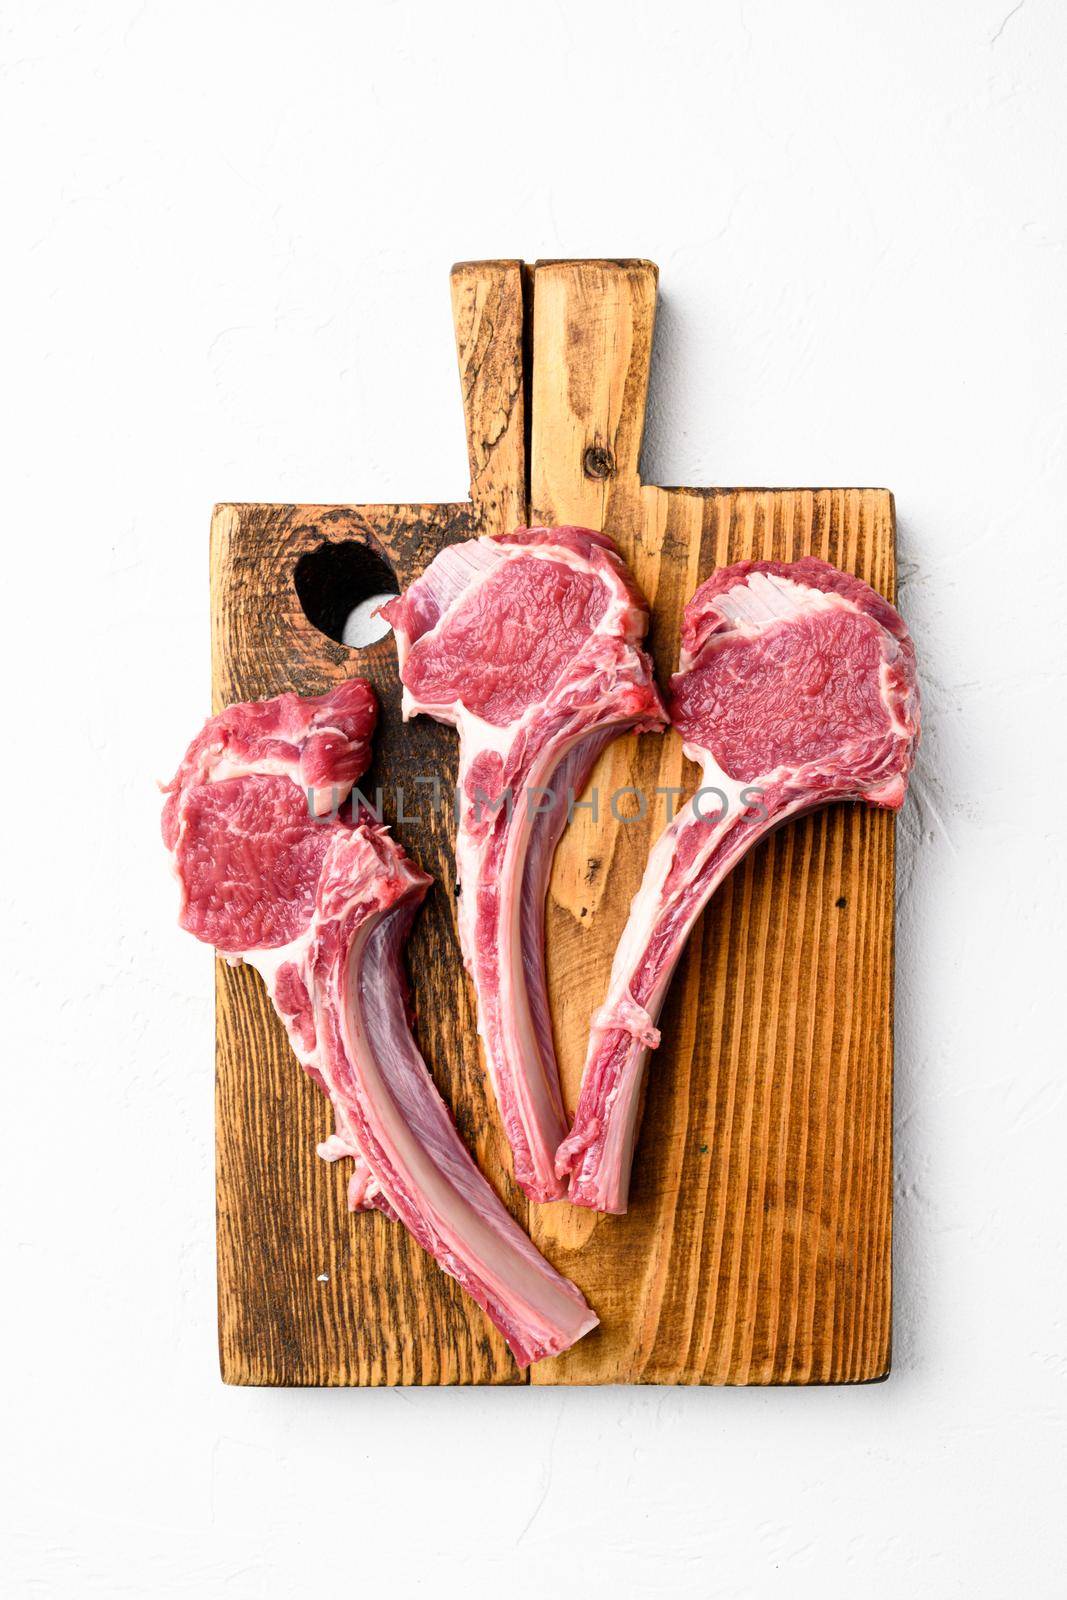 Lamb chops or mutton cuts set, on white stone table background, top view flat lay